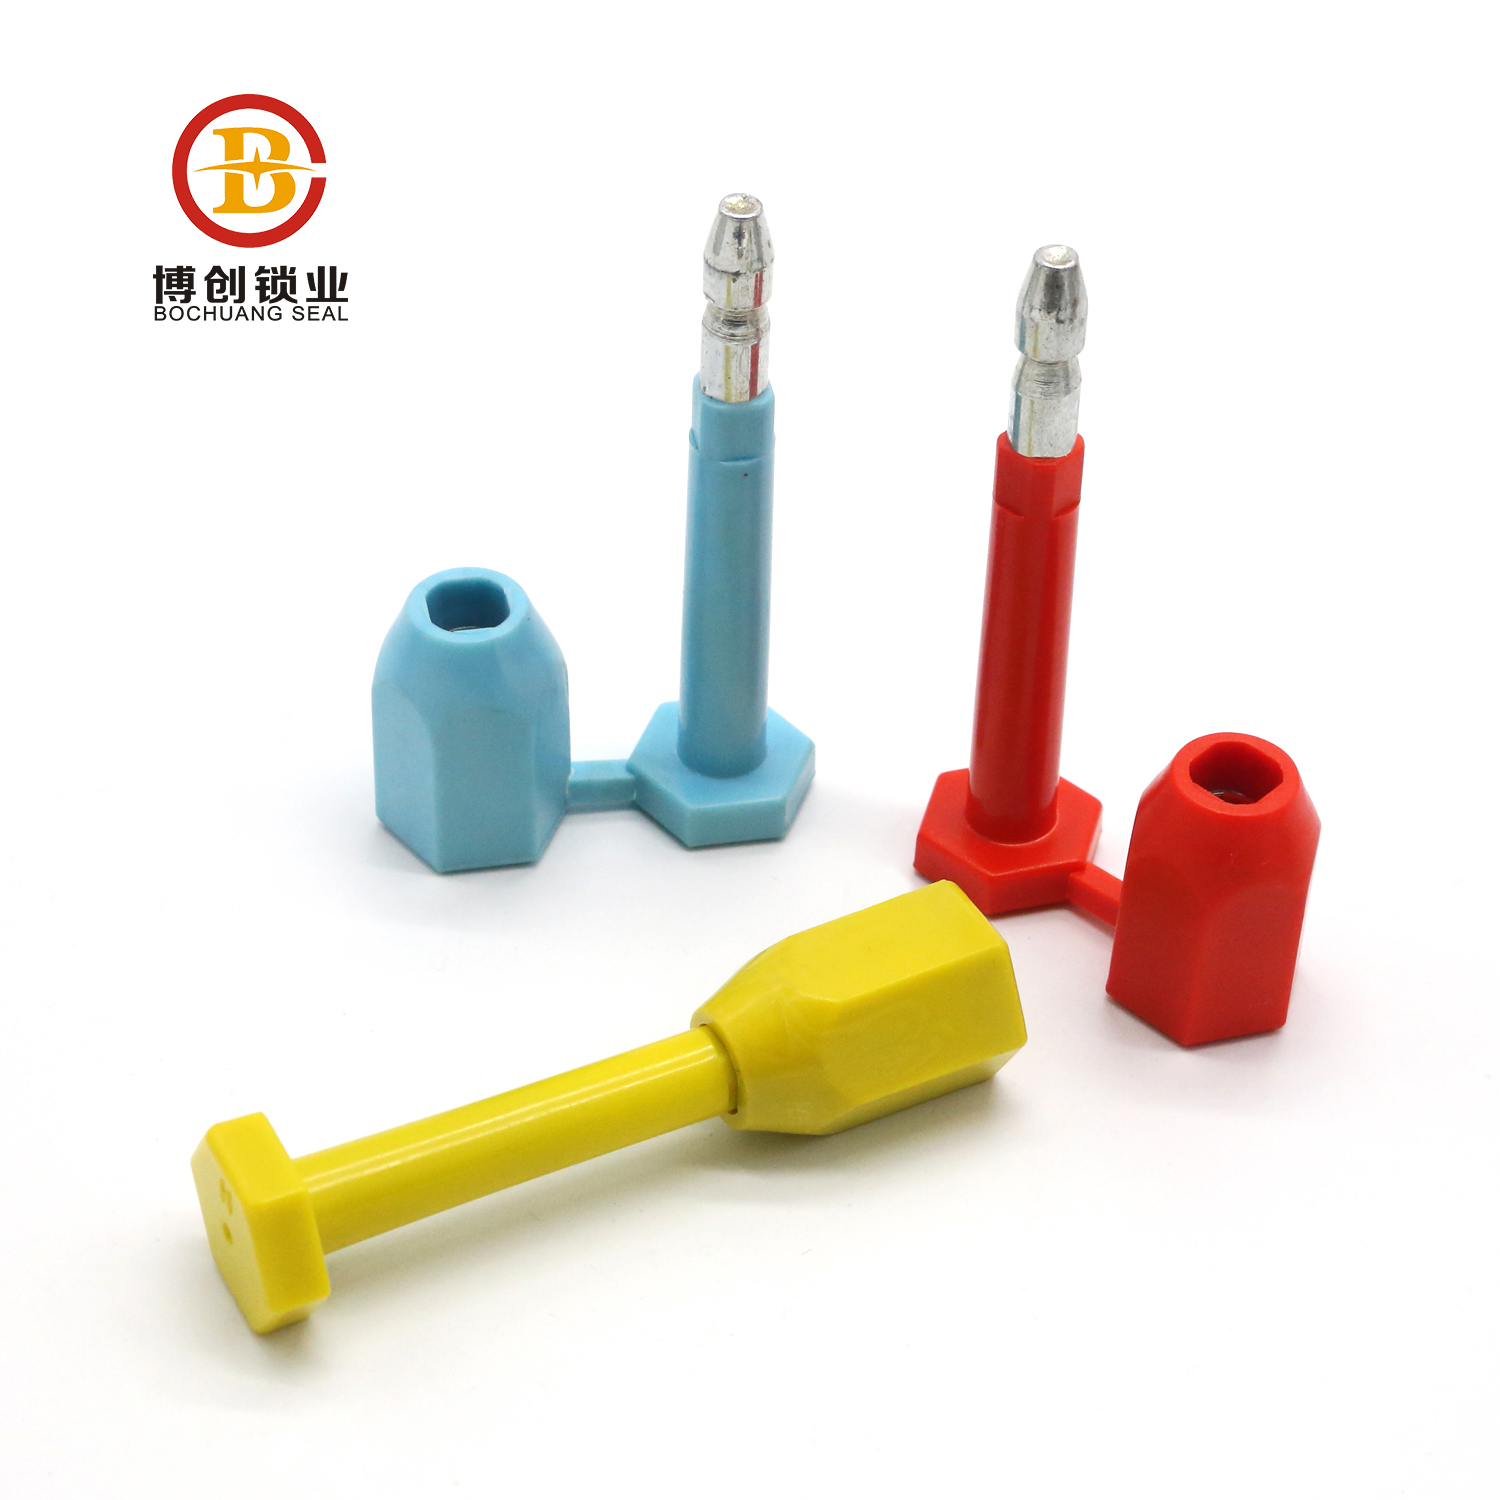 BC-B303China gold supplier low price bolt seal for cargo containers